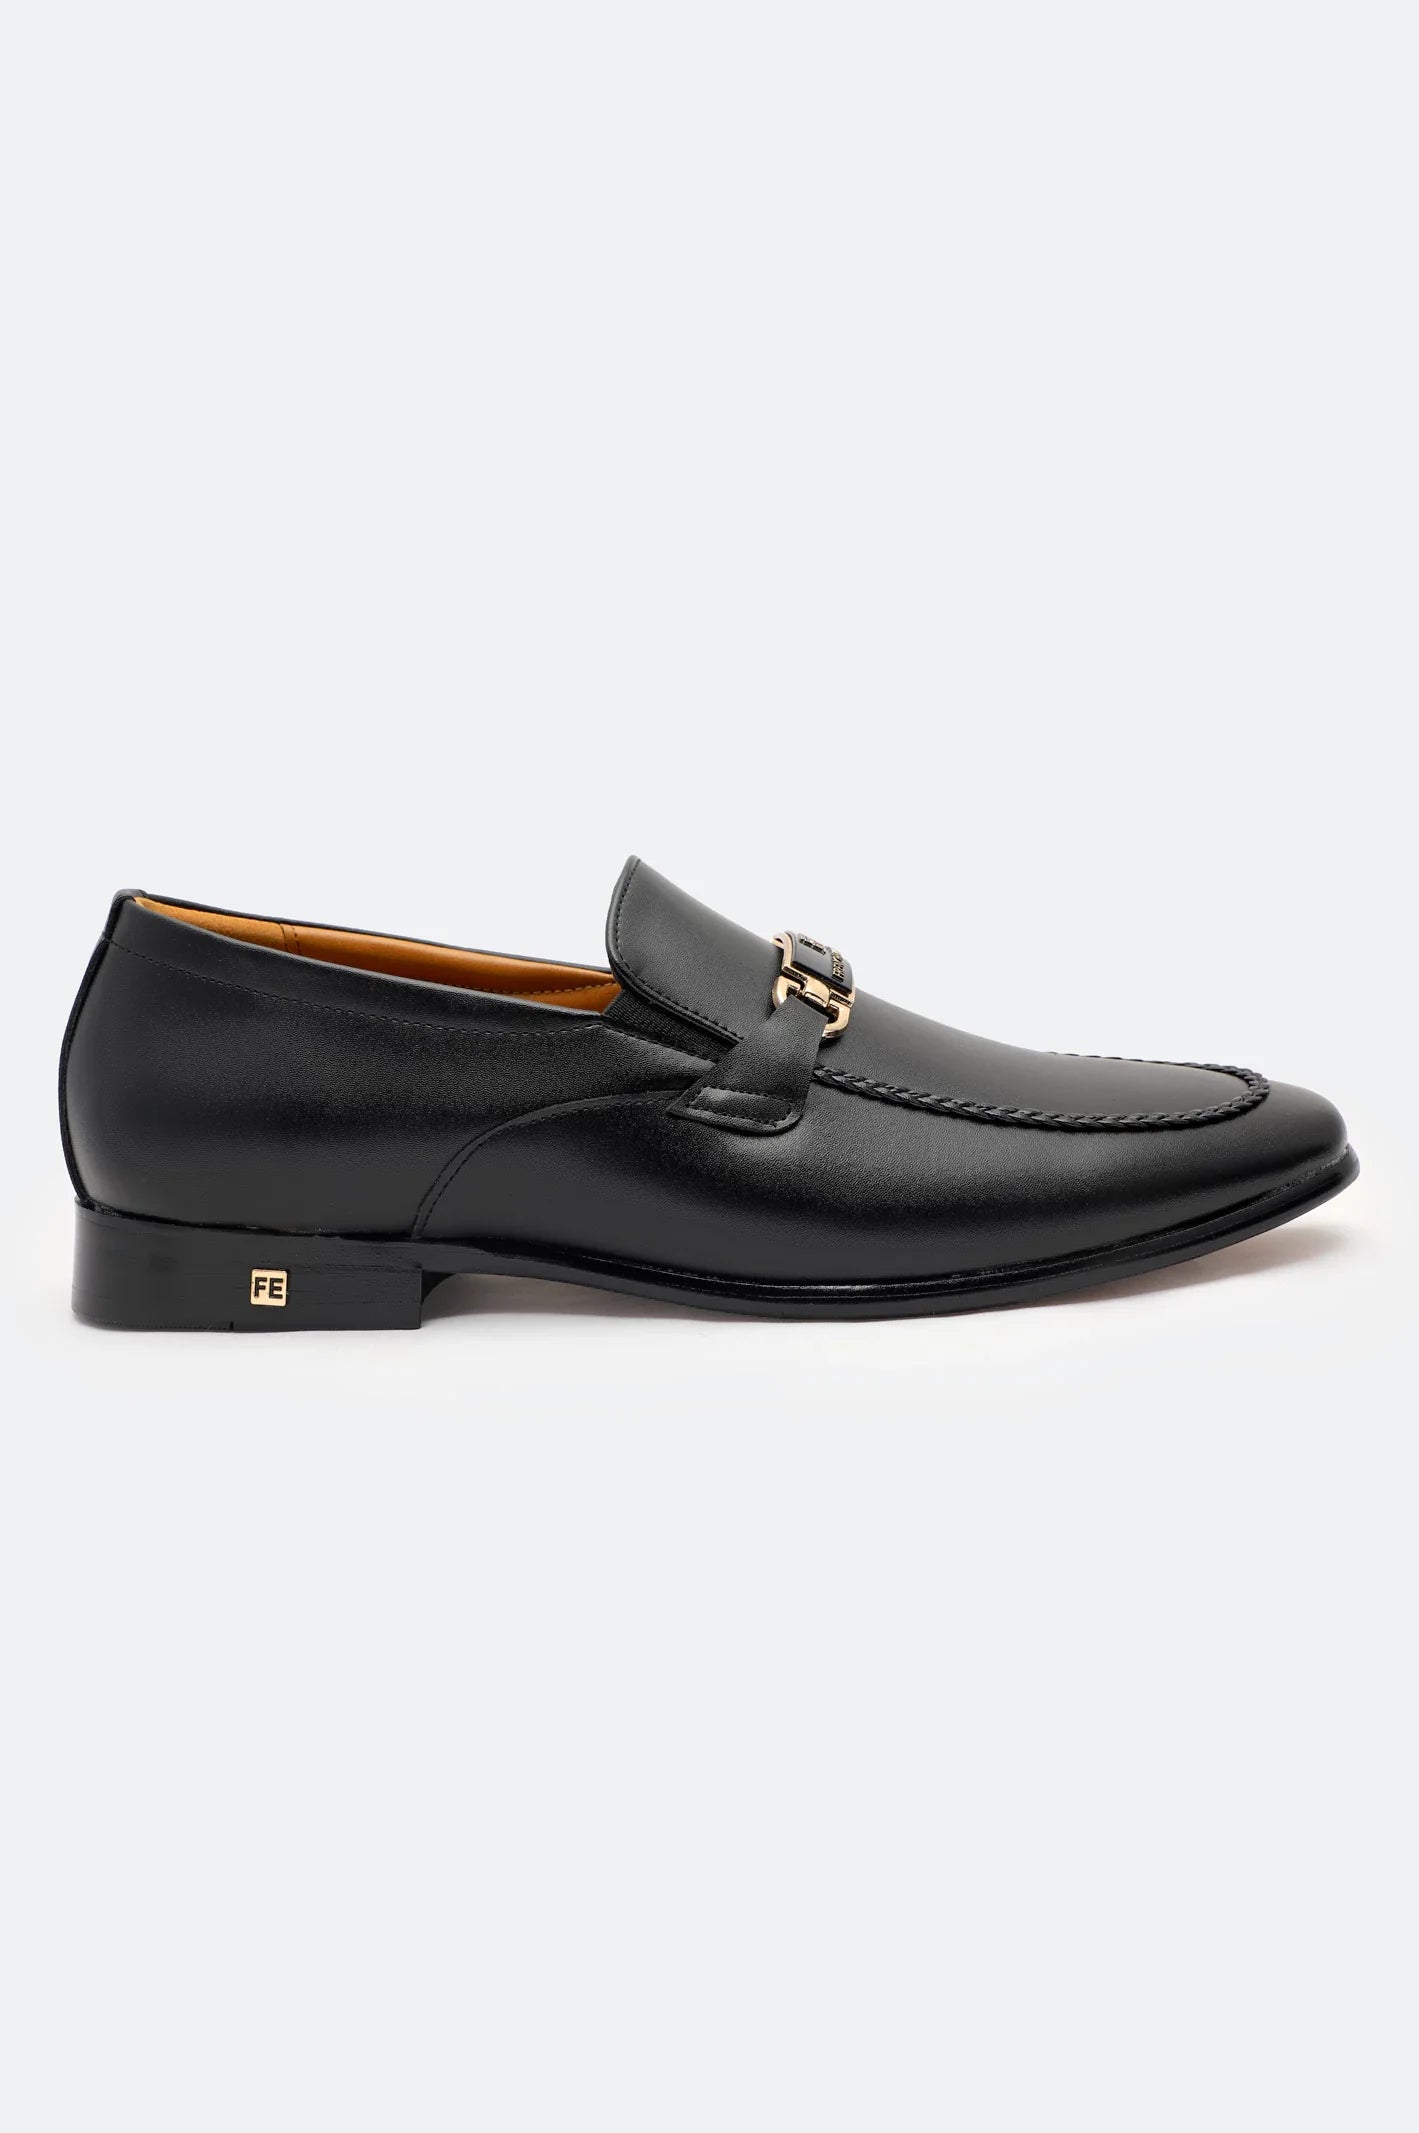 Black Formal Mocassins Shoes Premium Shoes From French Emporio By Diners